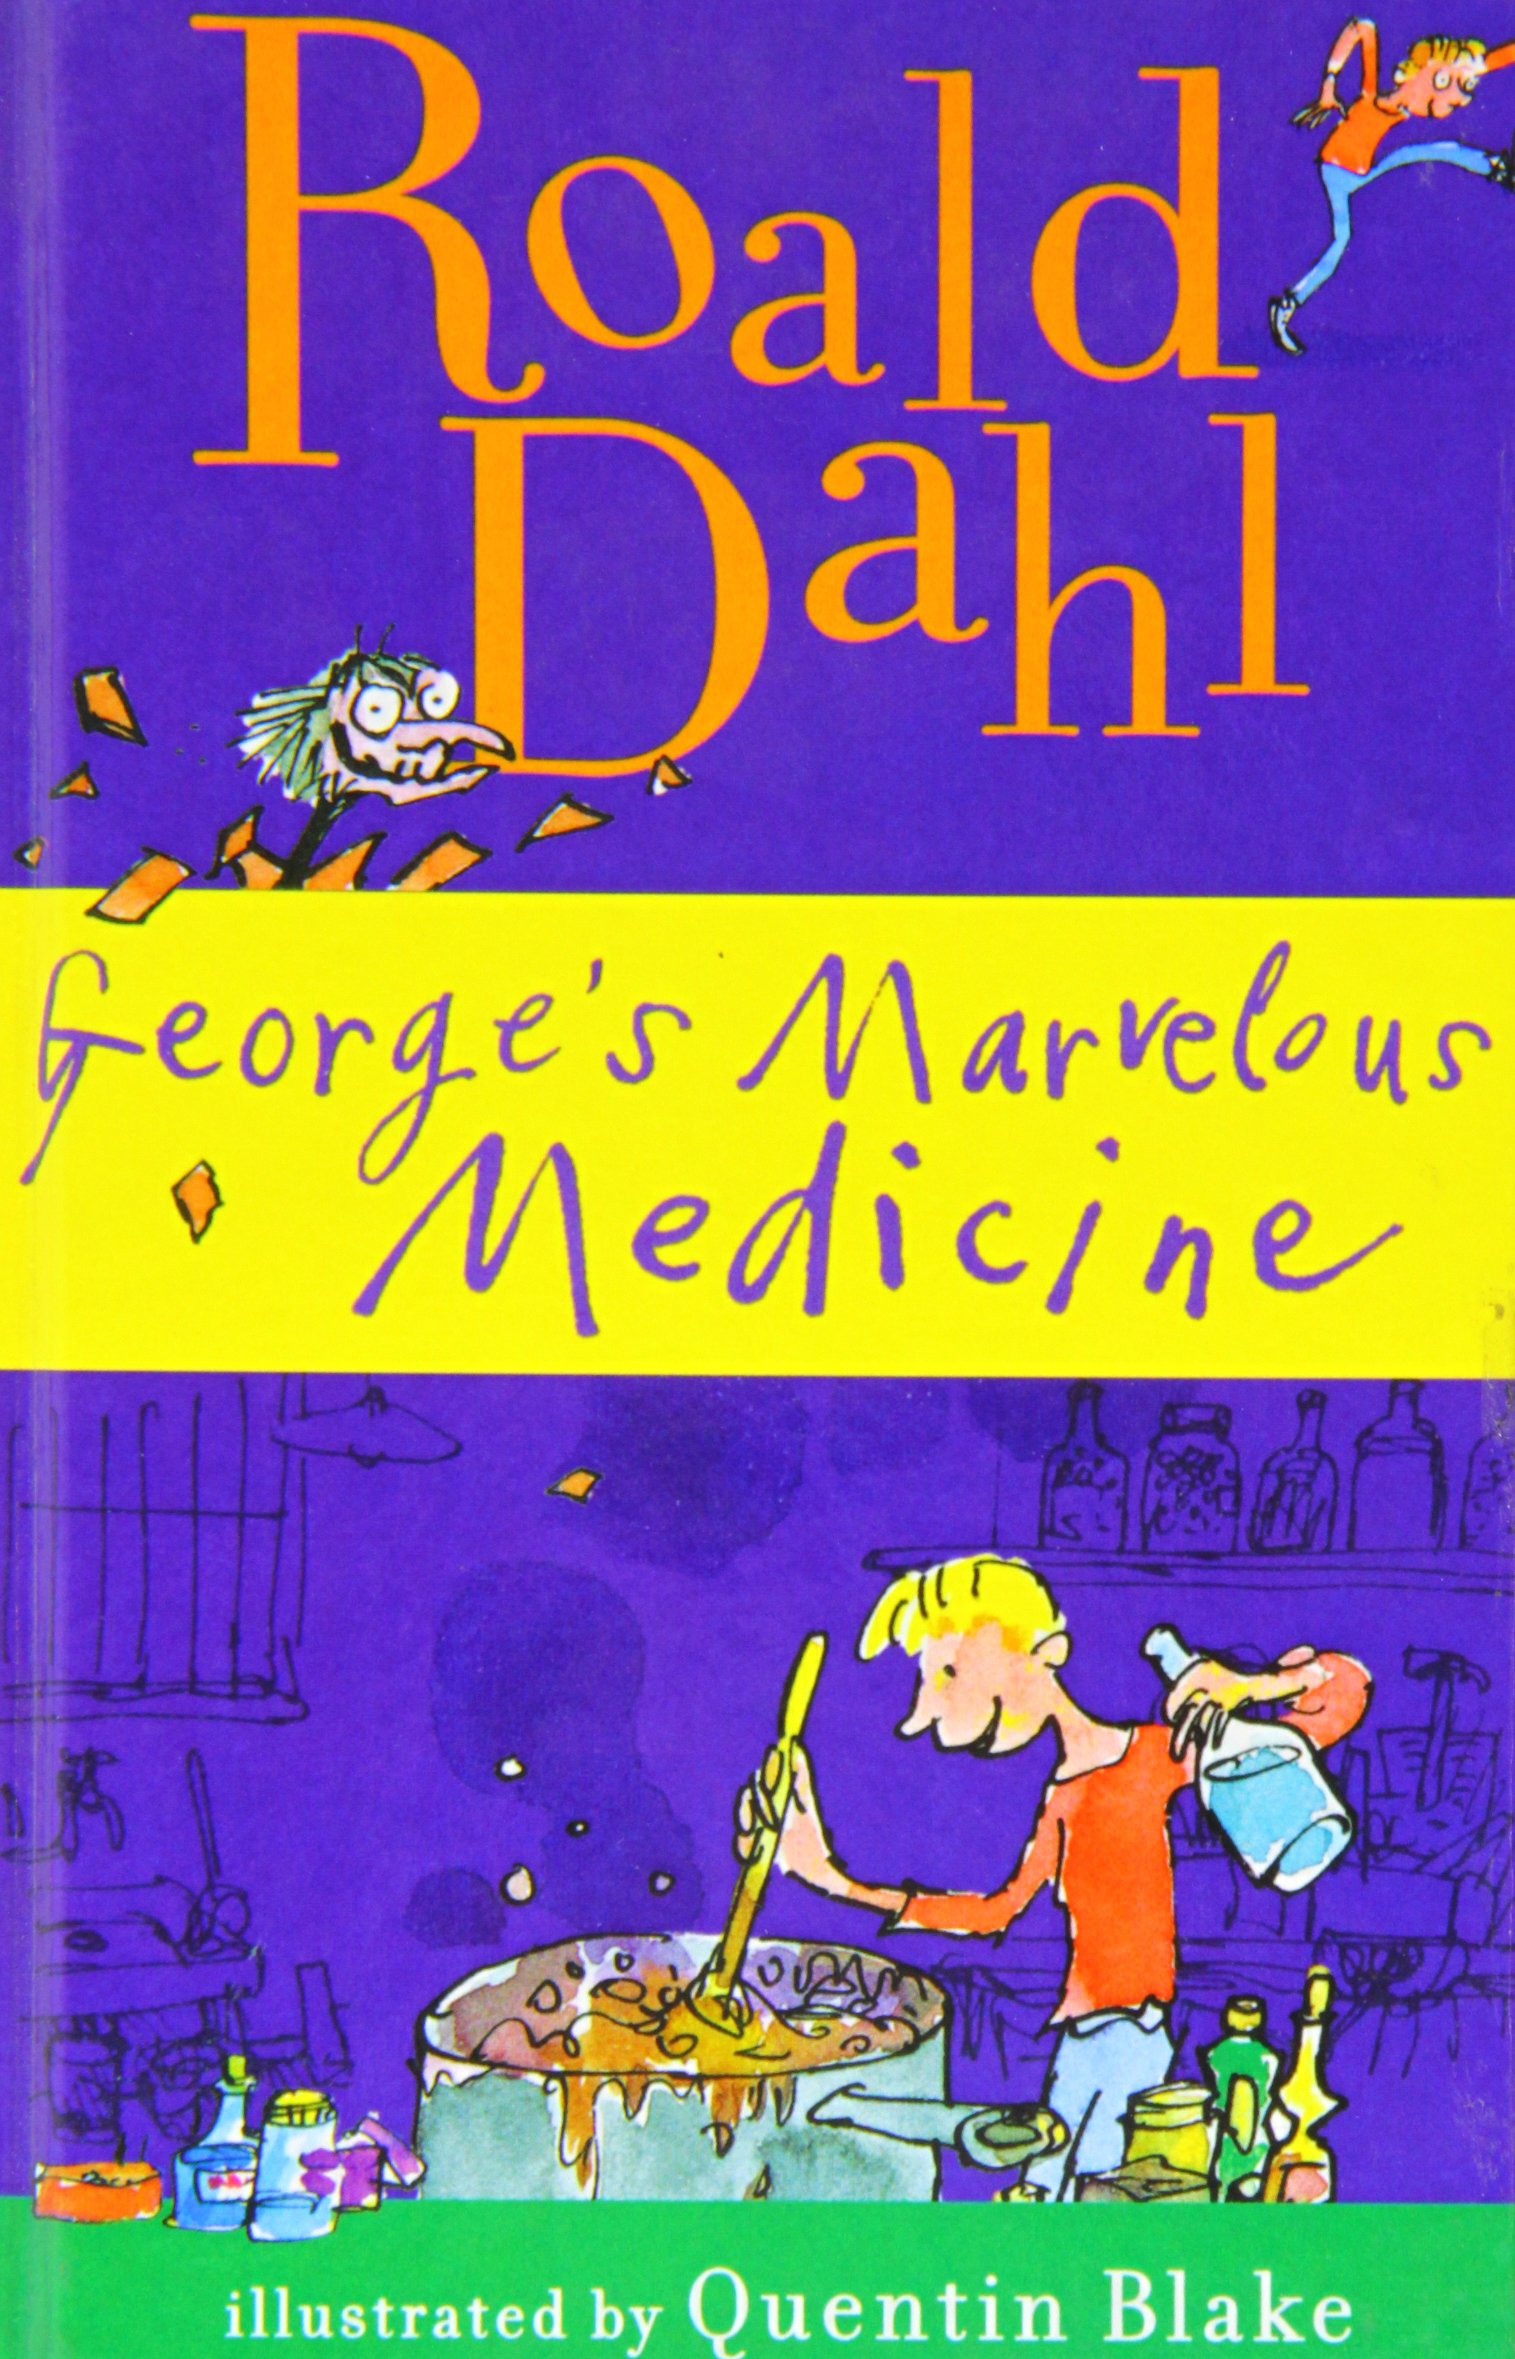 book review on george's marvellous medicine